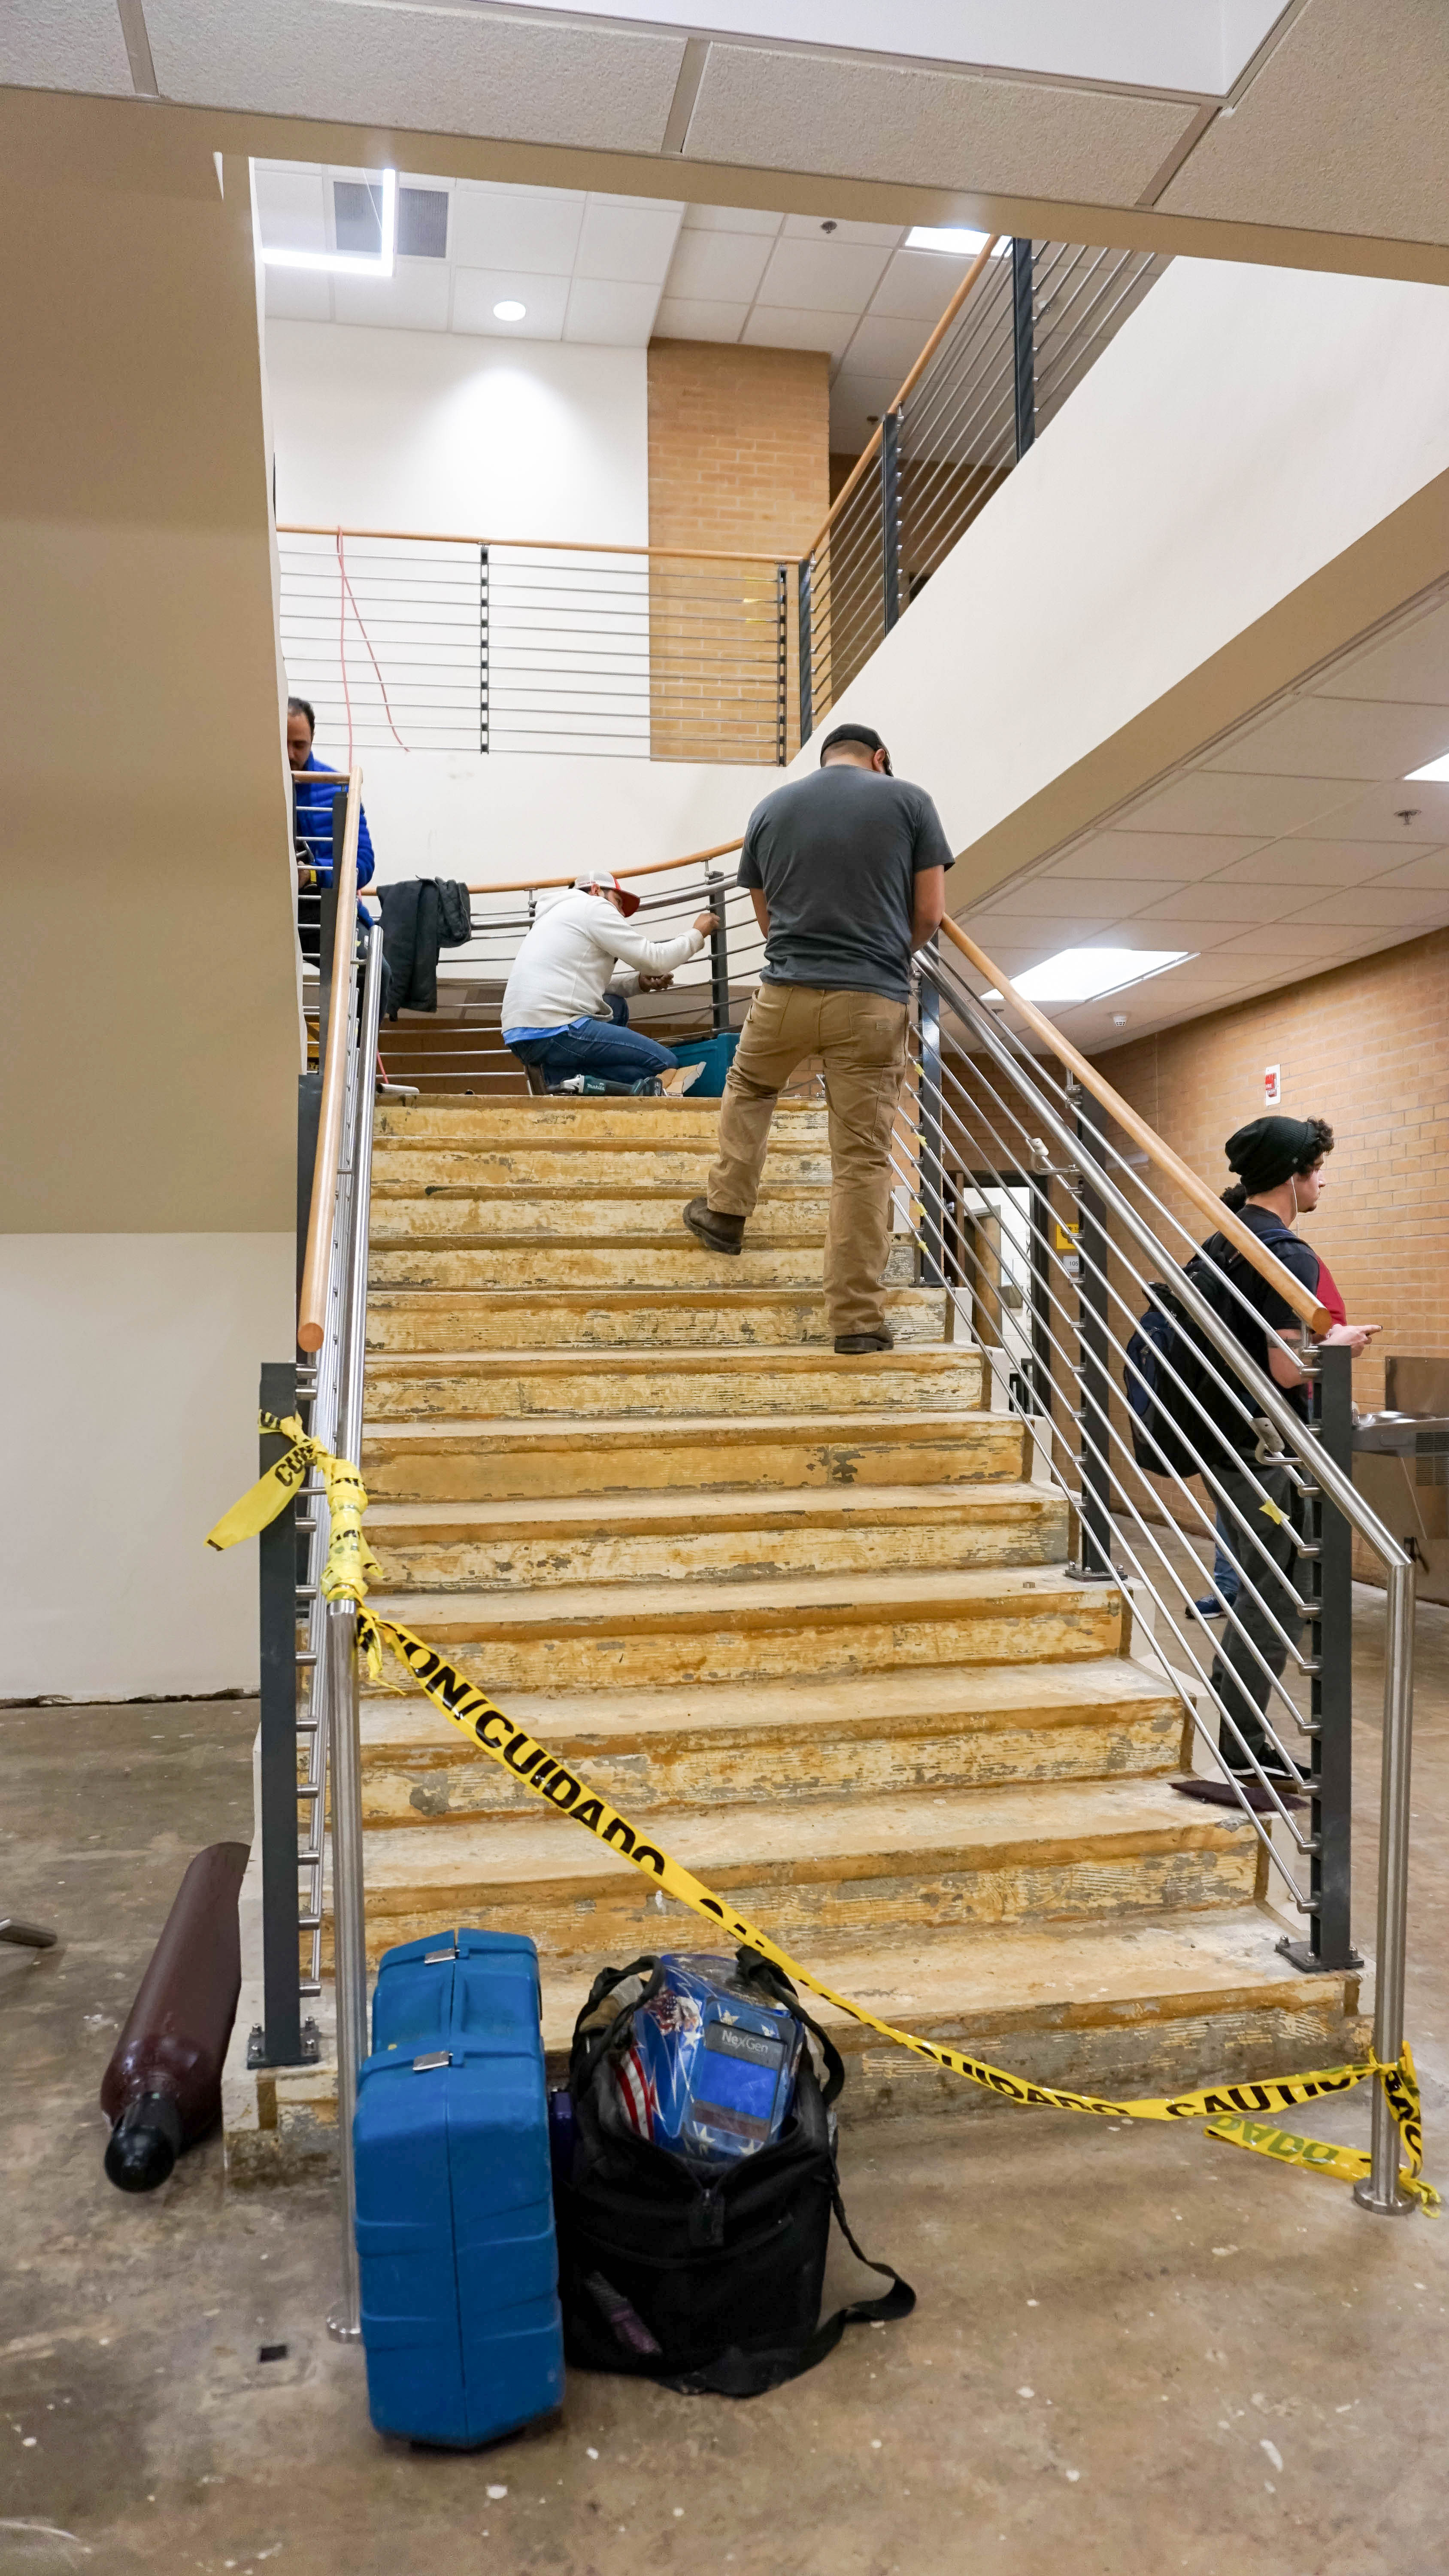 English building renovations to continue through spring